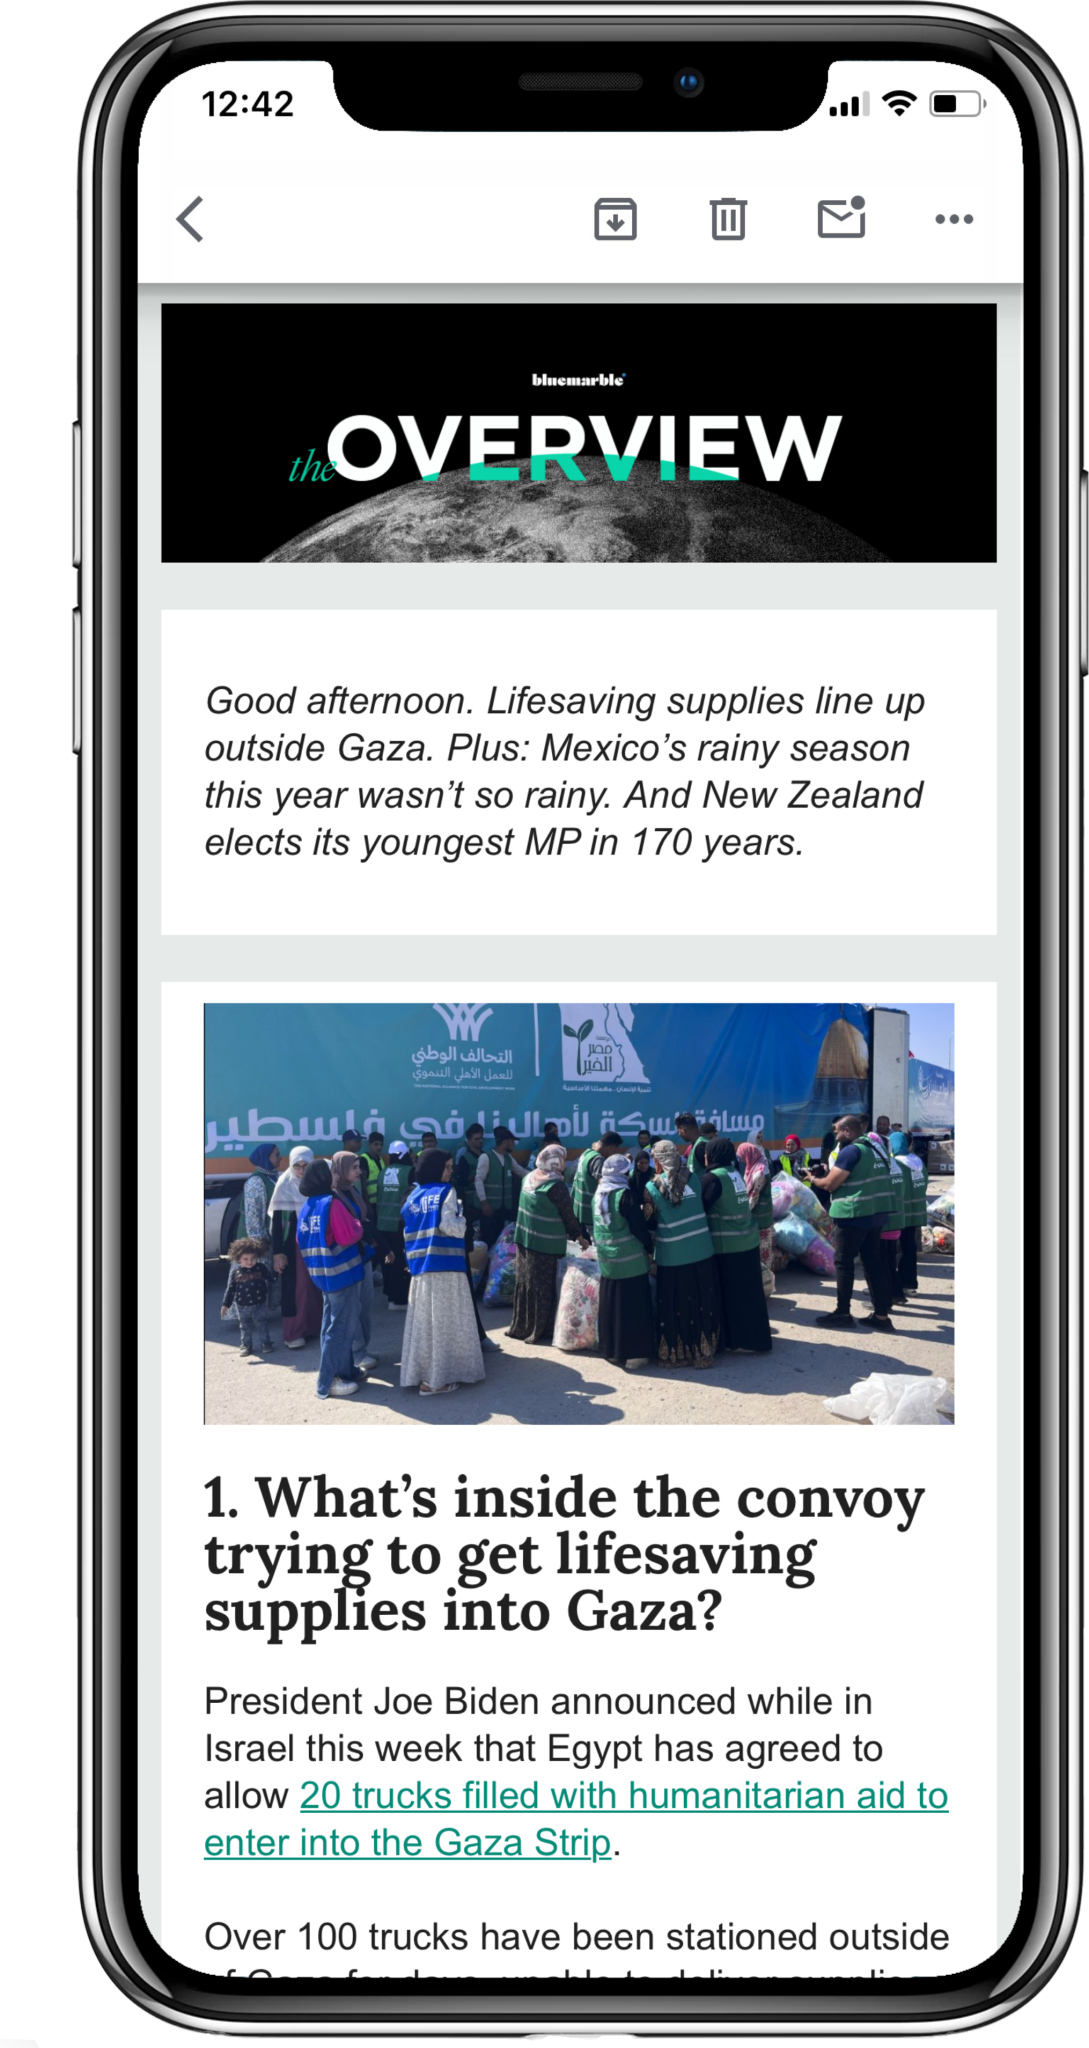 A screenshot of an issue of "The Overview" newsletter in a mobile display.